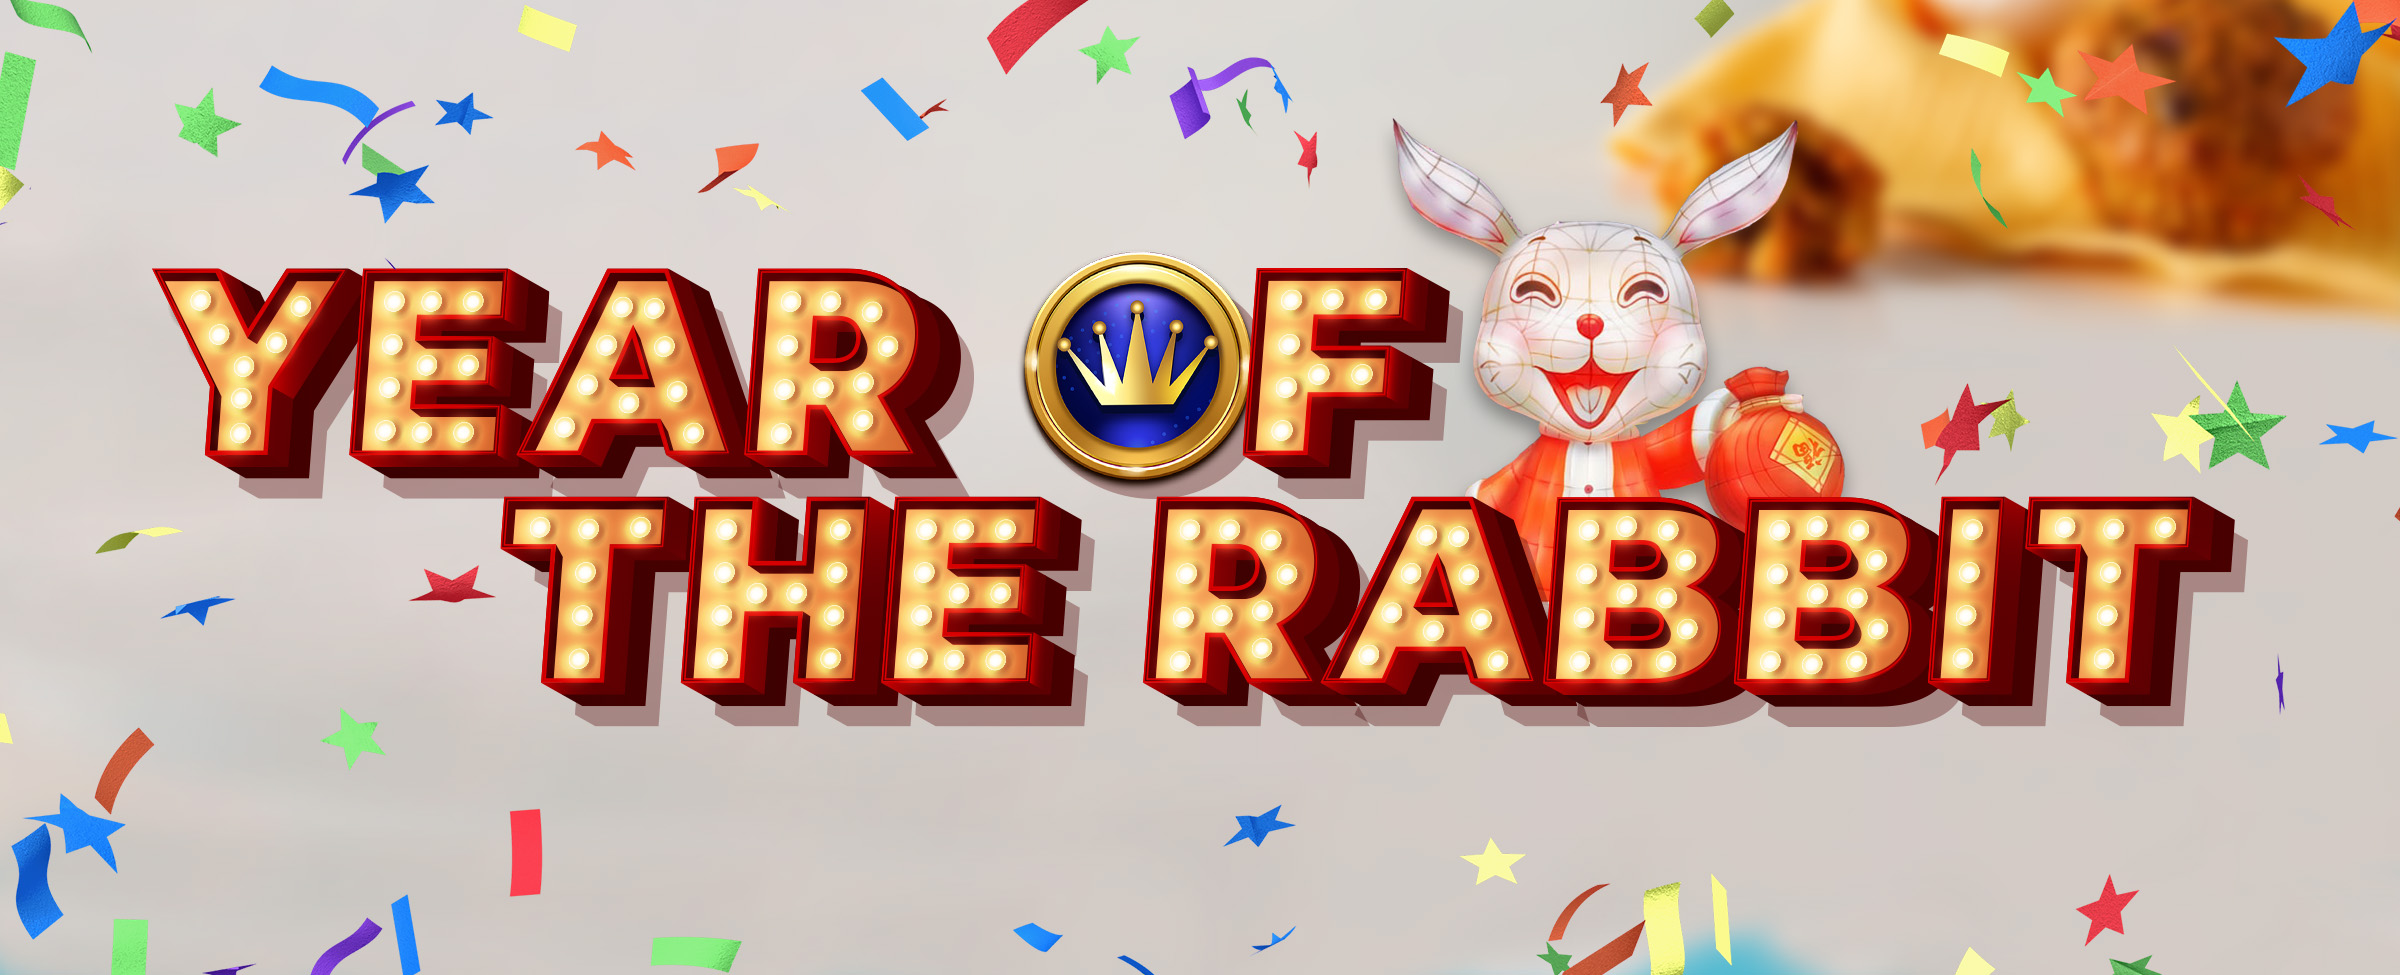 Prominently displayed in the middle of the image is text that reads “Year of the Rabbit” in Vegas-style font. Inside the O of “of” is a gold and blue crown symbol, representing Cafe Casino’s Hot Drop Jackpots. Behind the text is an animated rabbit character wearing a red jacket who’s holding up a red bag. 